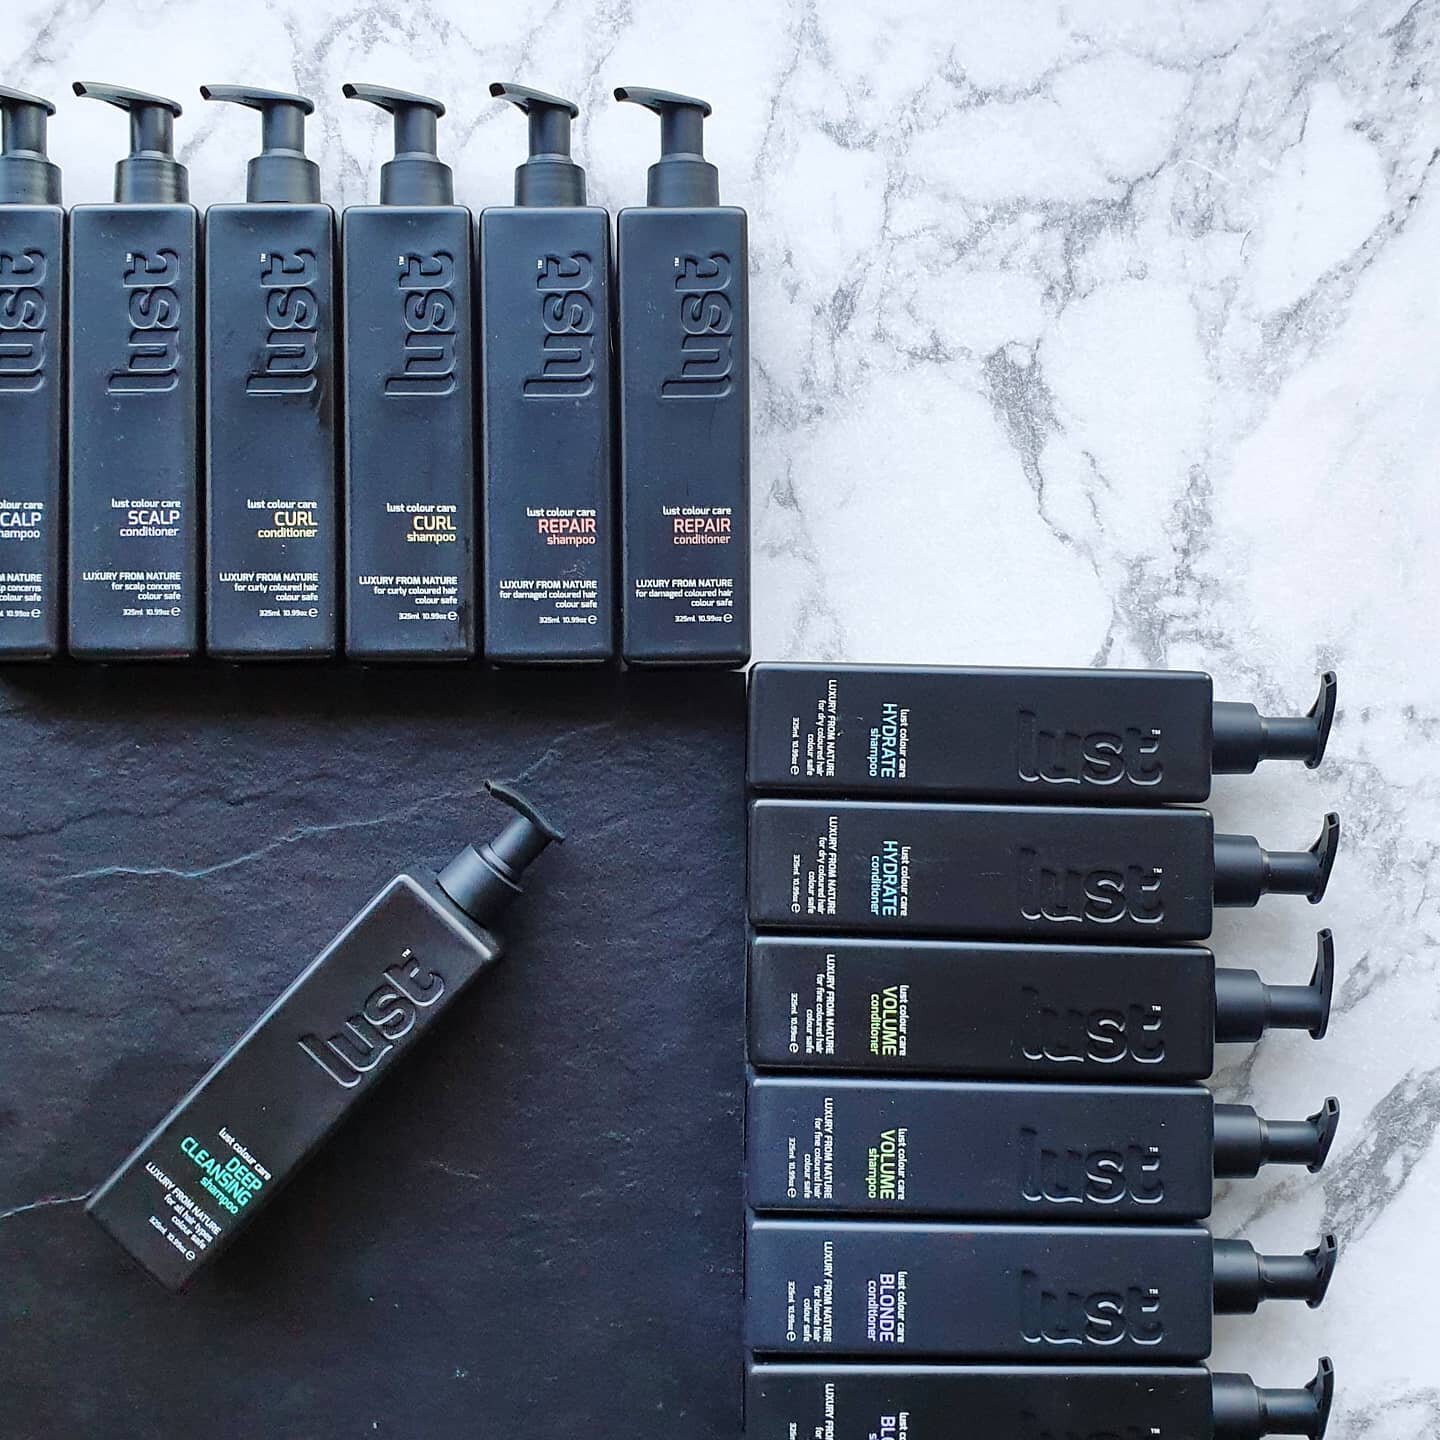 Lust Haircare has something for everyone 🖤